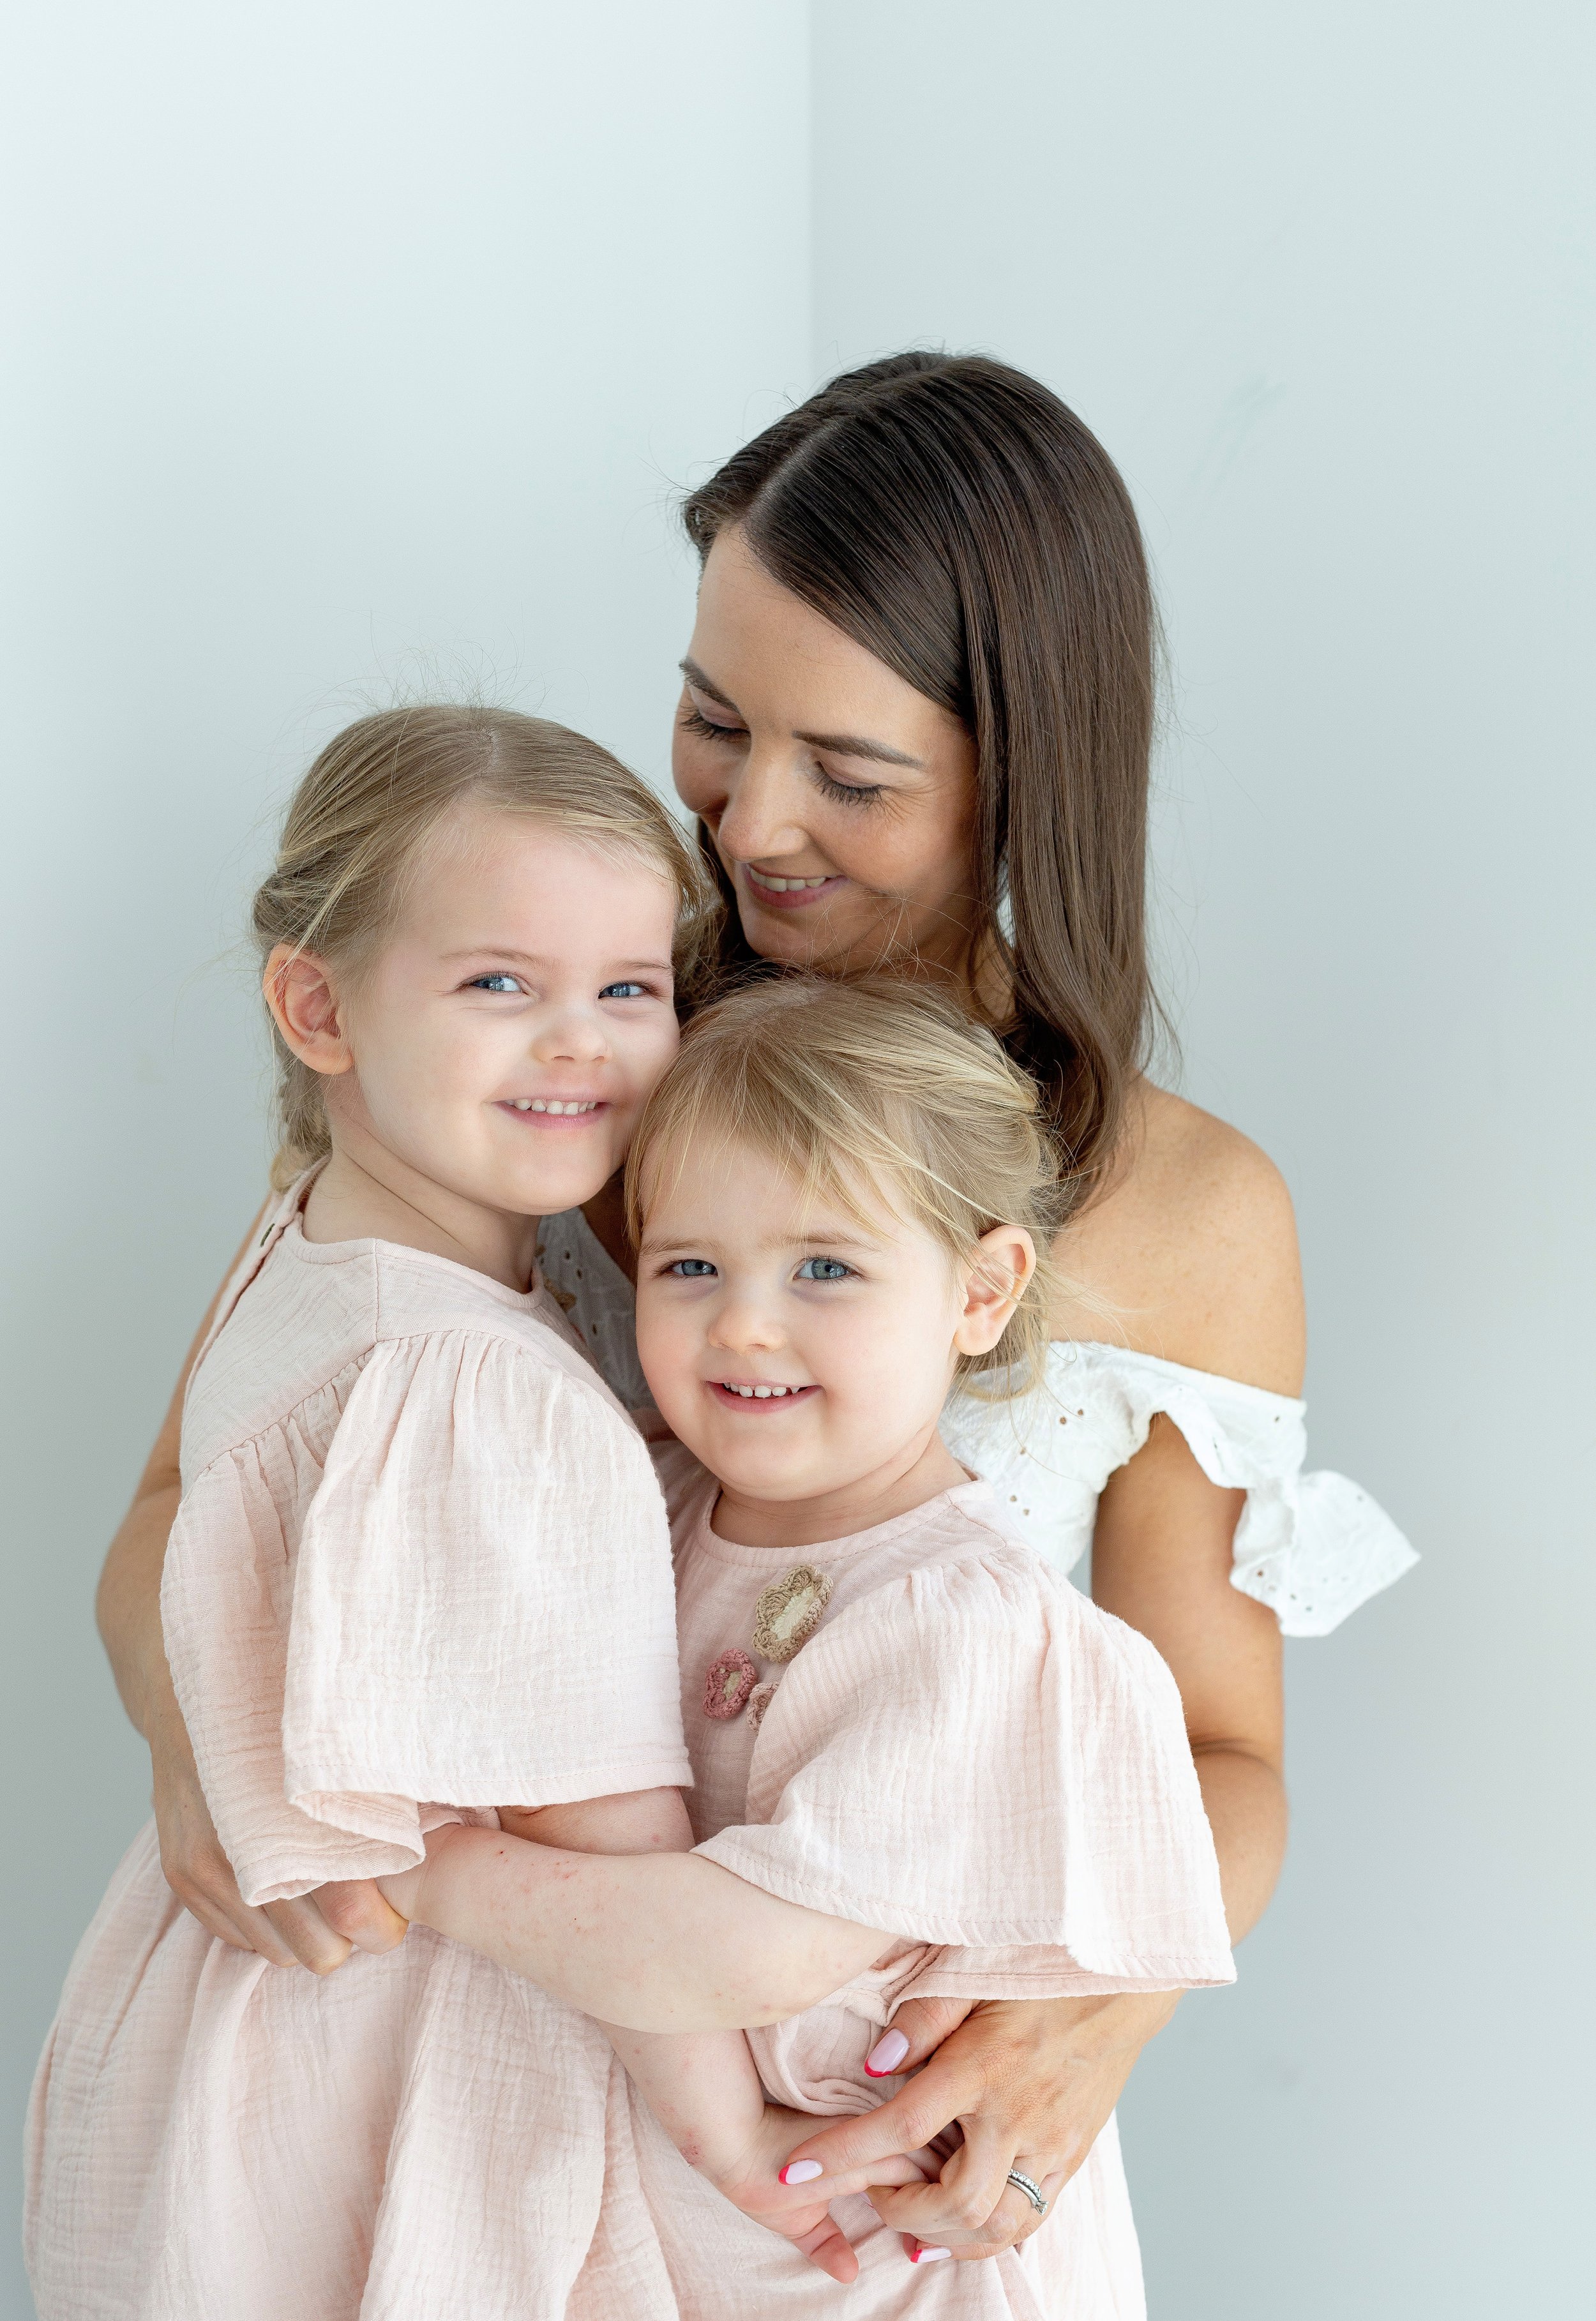 Mothers-Day-photography-session-hertfordshireEvie-Grace-PhotographyEvie-Grace-PhotographyIMG_0814.jpg